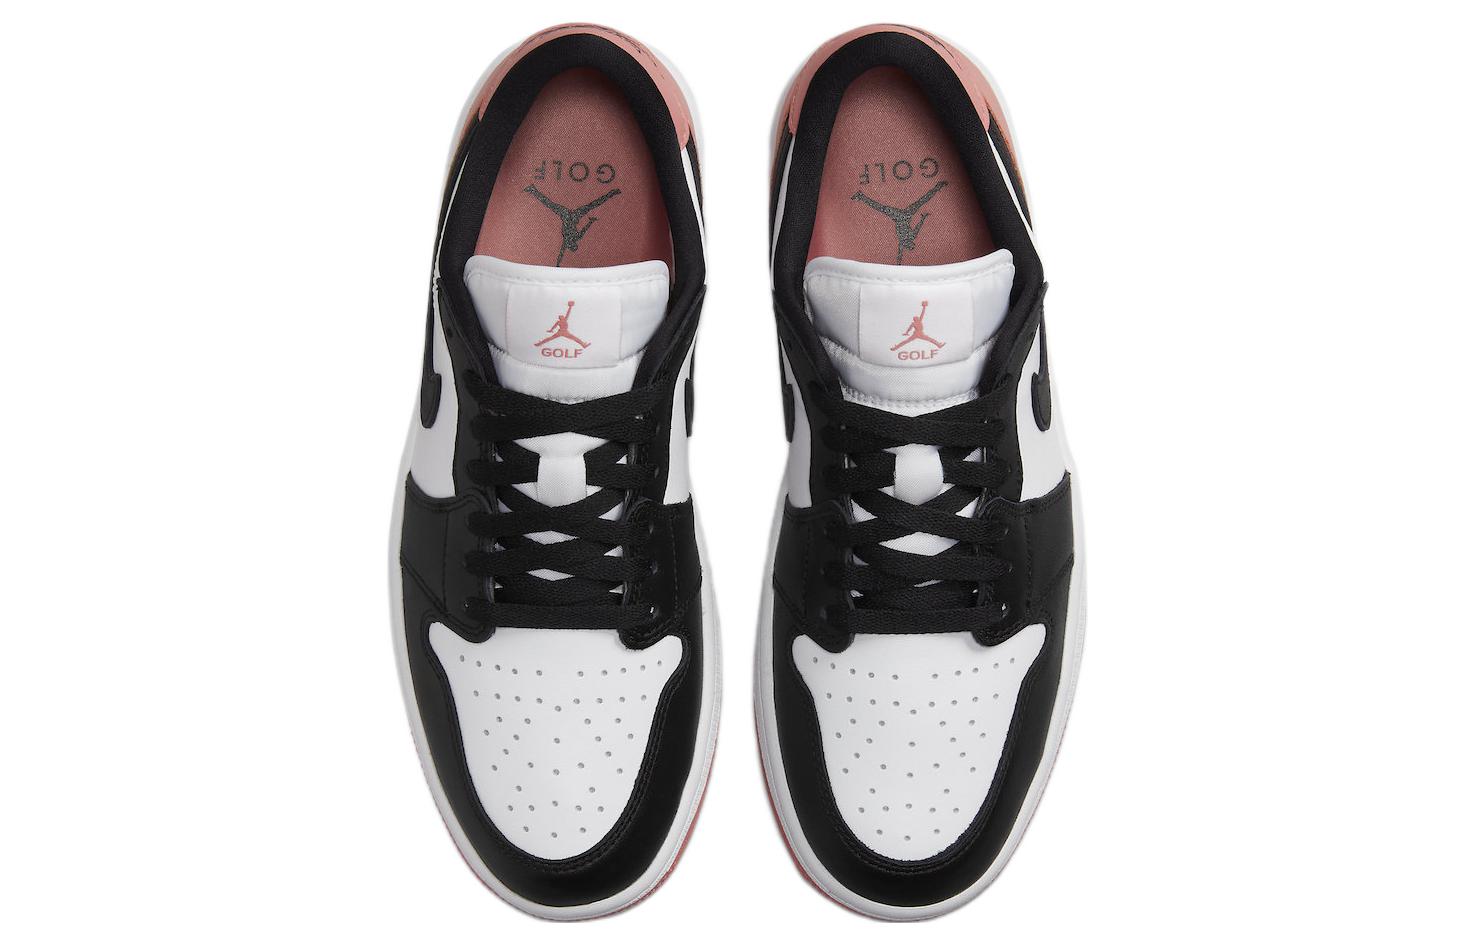 Air Jordan 1 Retro Low Golf 'Rust Pink' DD9315-106 Epoch-Defining Shoes - Click Image to Close